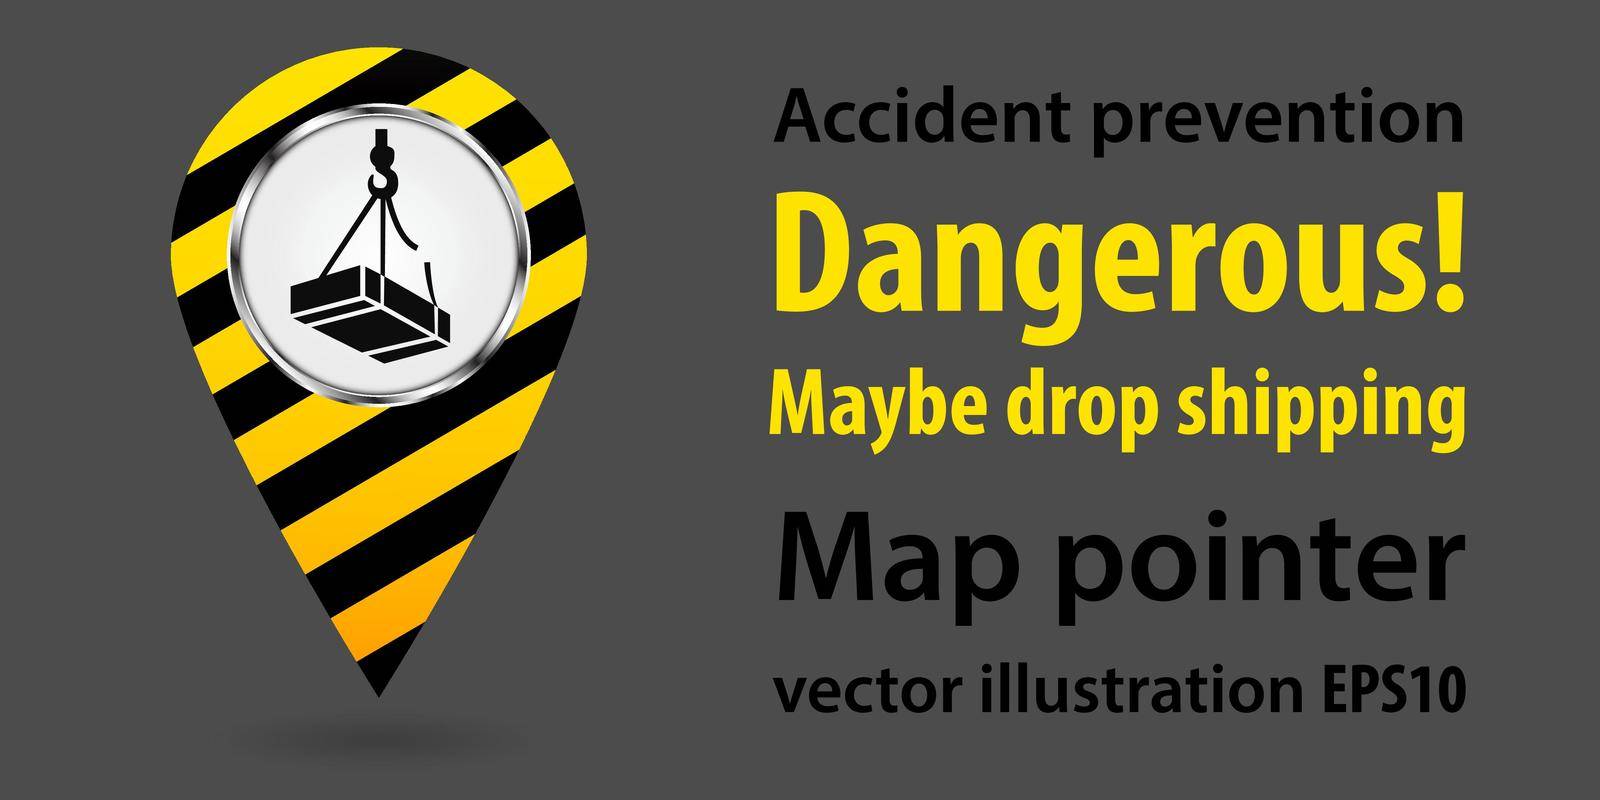 Map pointer. Dangerous maybe drop shipping. Safety information. Industrial design. Vector illustration. by Nikolaiev_Oleksii